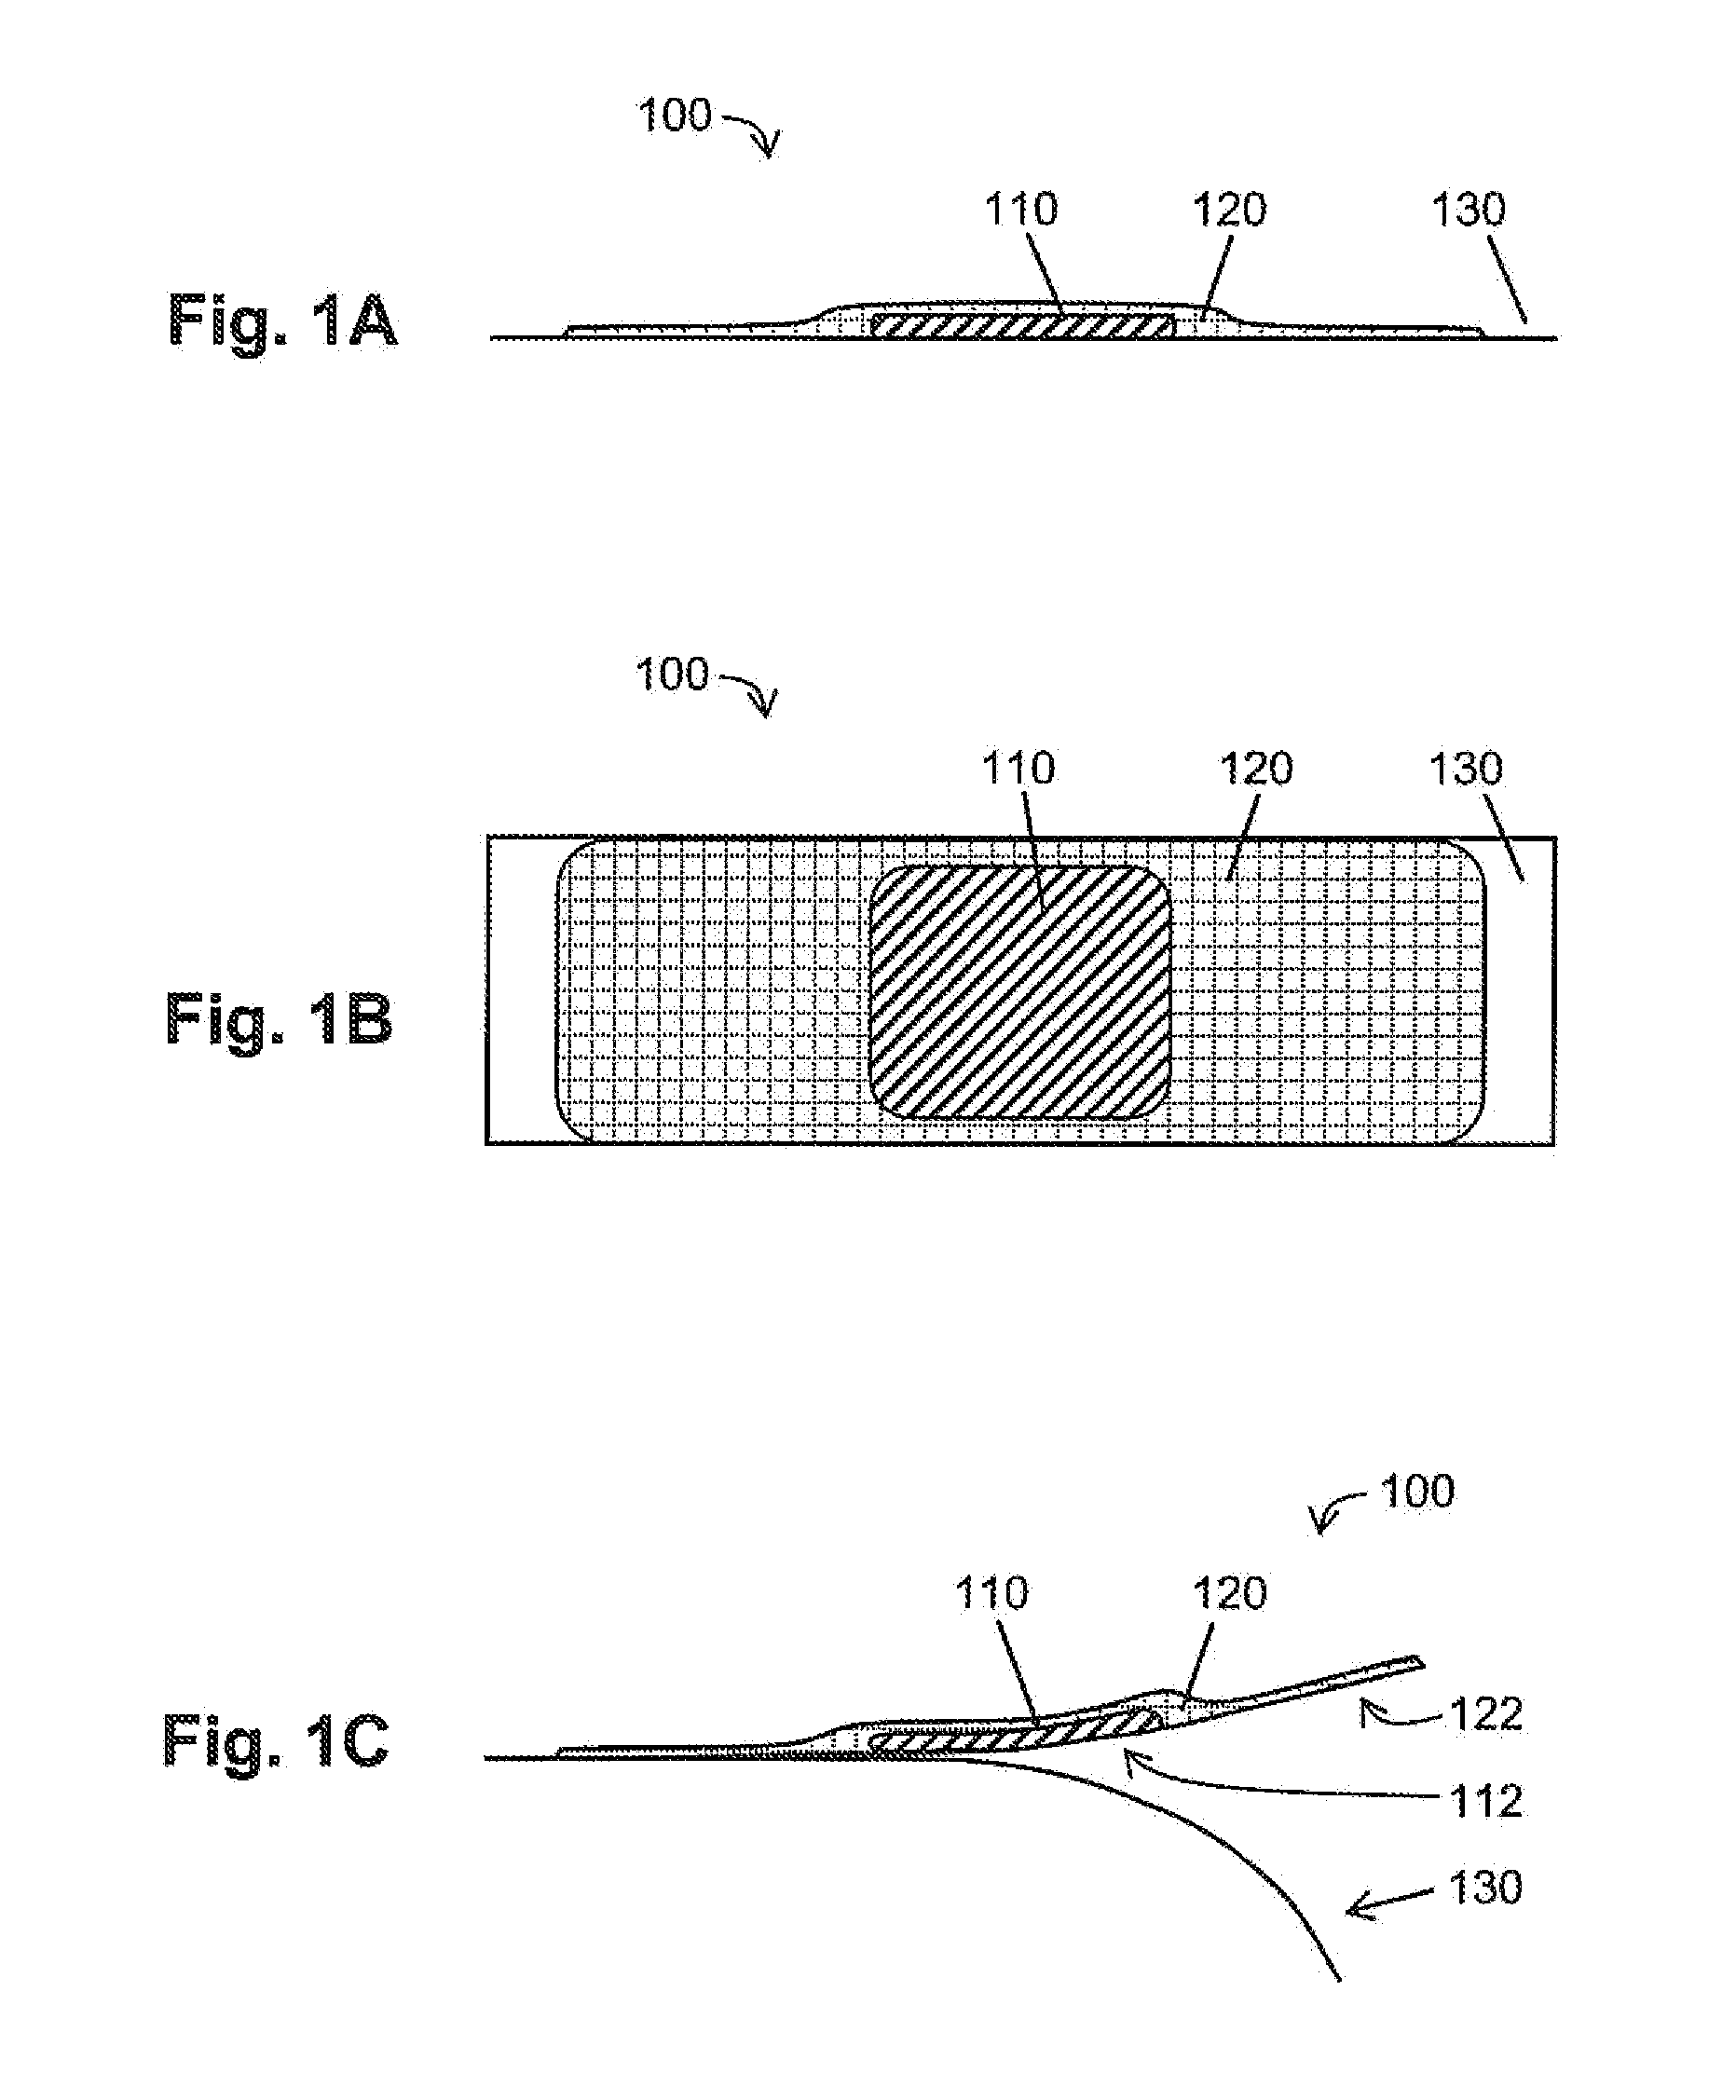 Methods of Treating Infections of the Nail or Skin Using Hypohalite